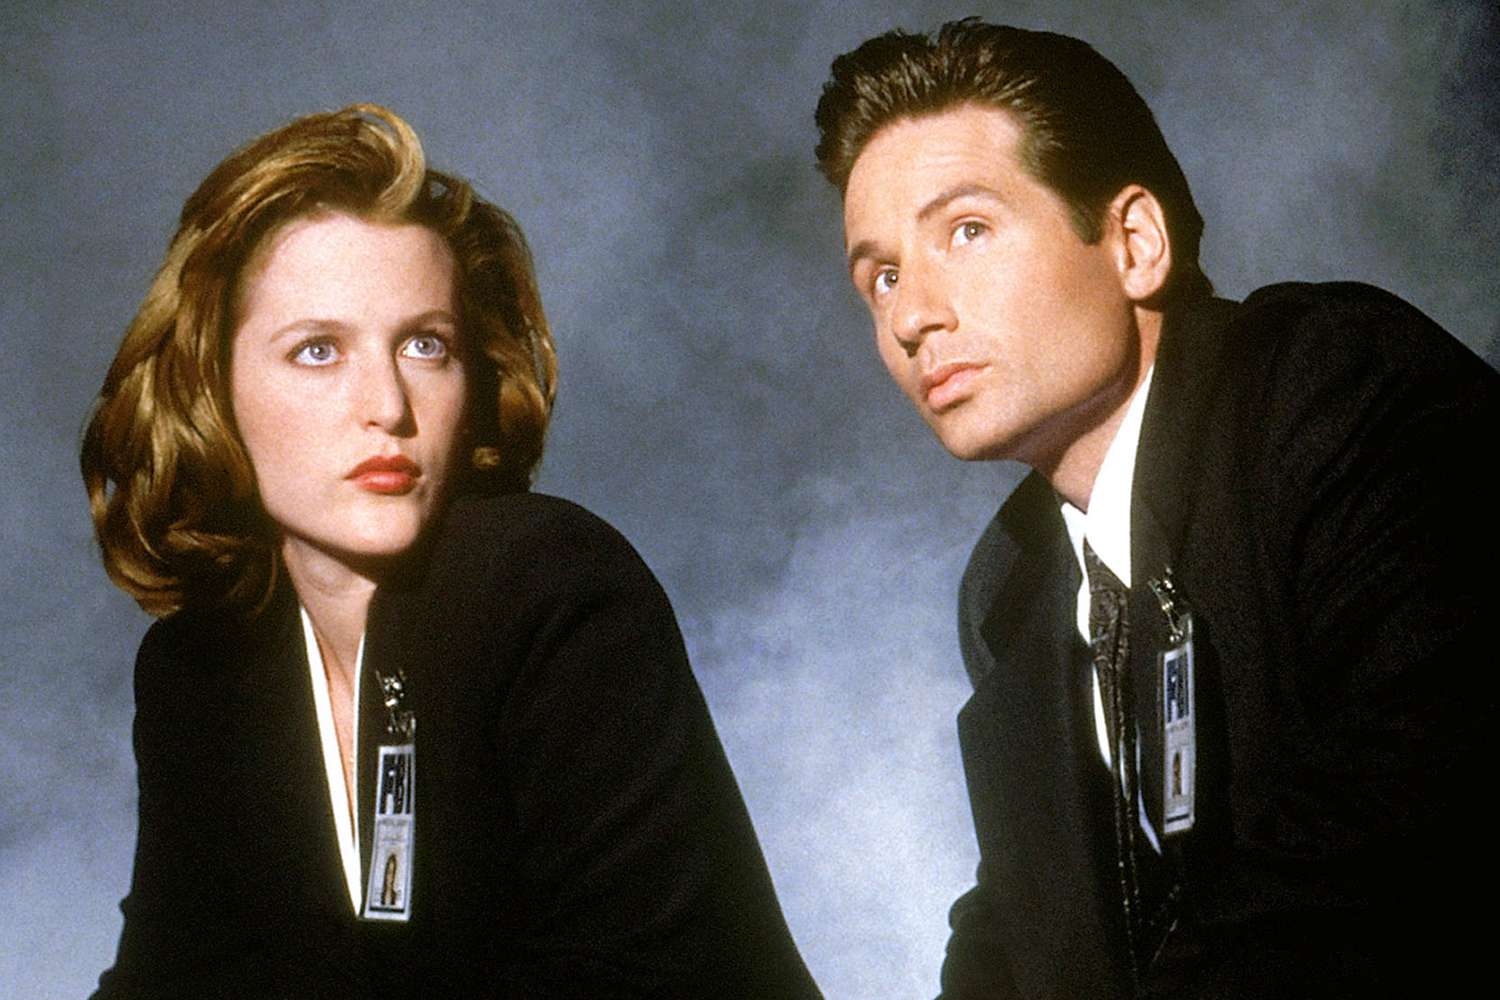 David Duchovny Recalls the 'Immediate Connection' with Gillian Anderson Before Being Cast on “The X-Files ”(Exclusive)